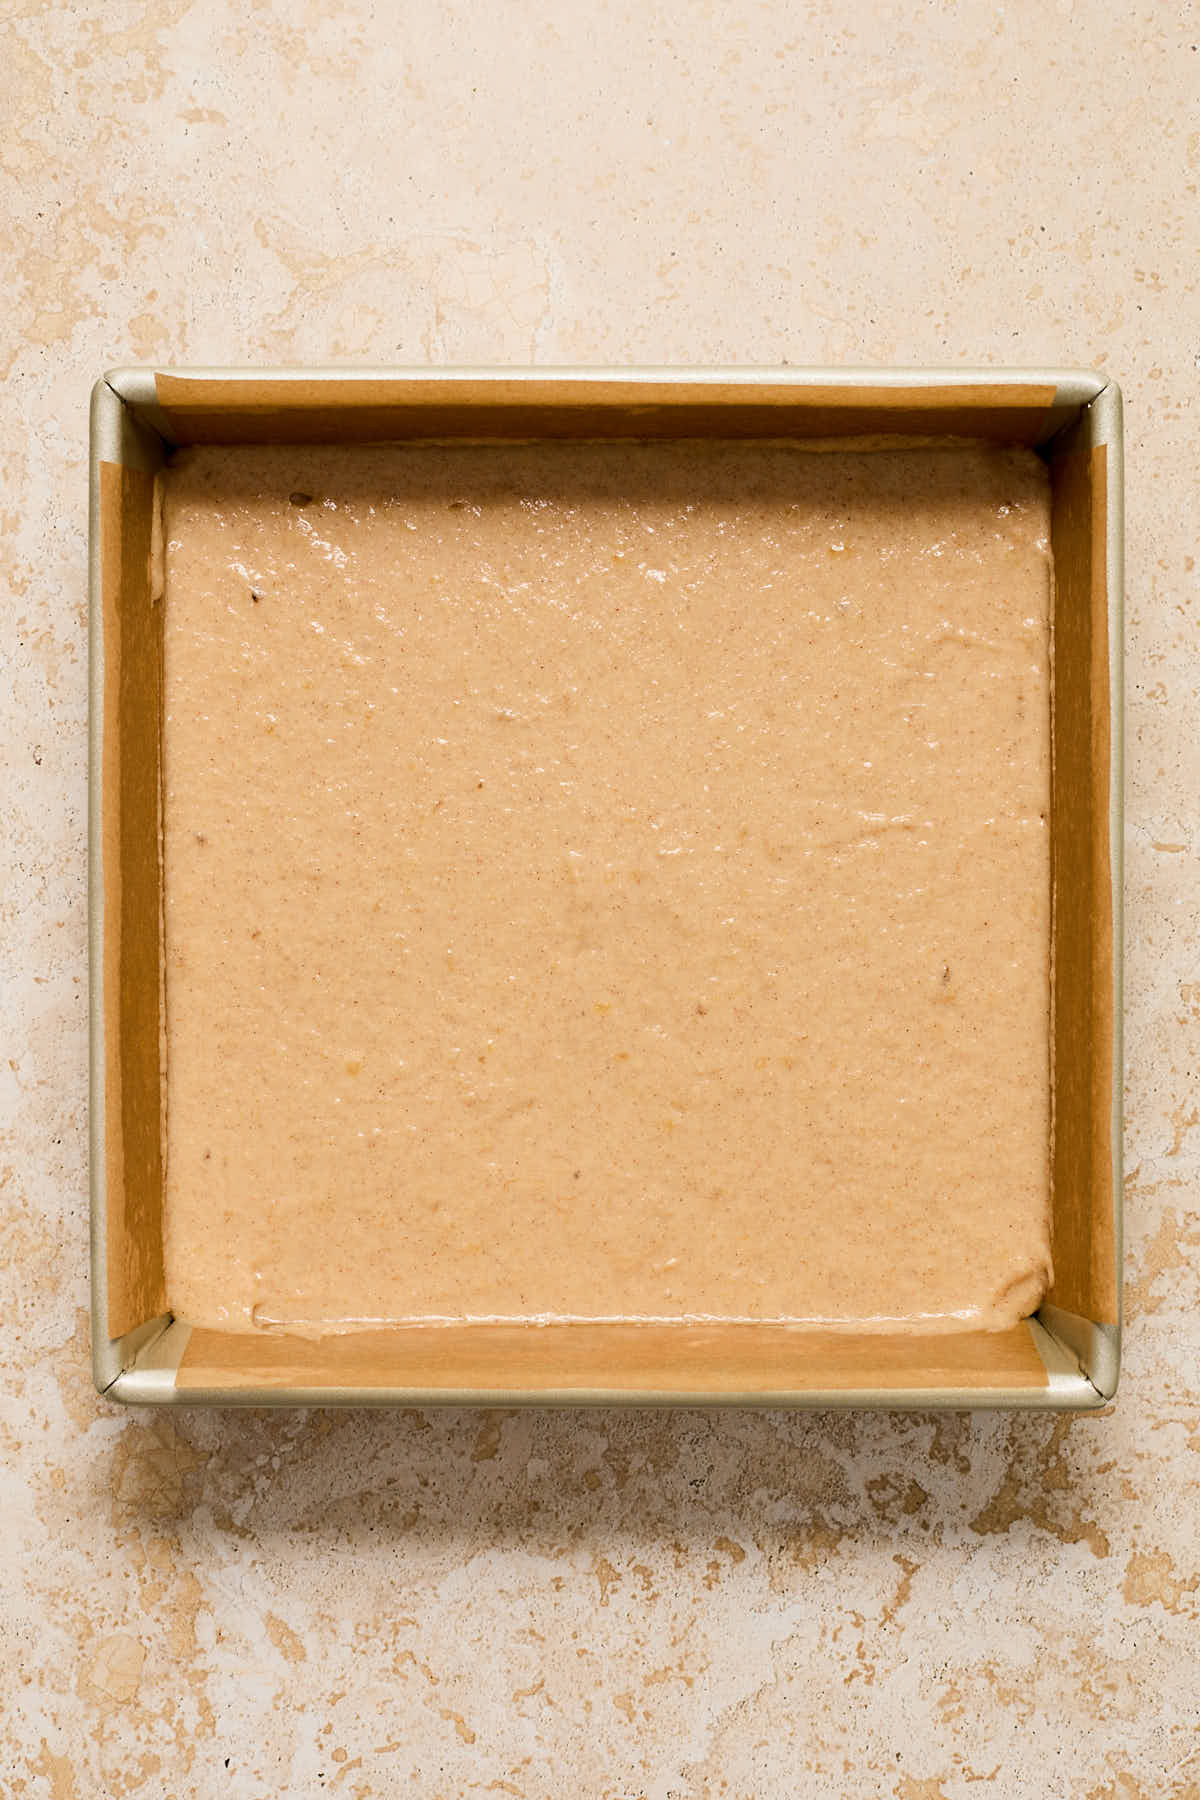 Cake batter spread out in a parchment paper lined pan.